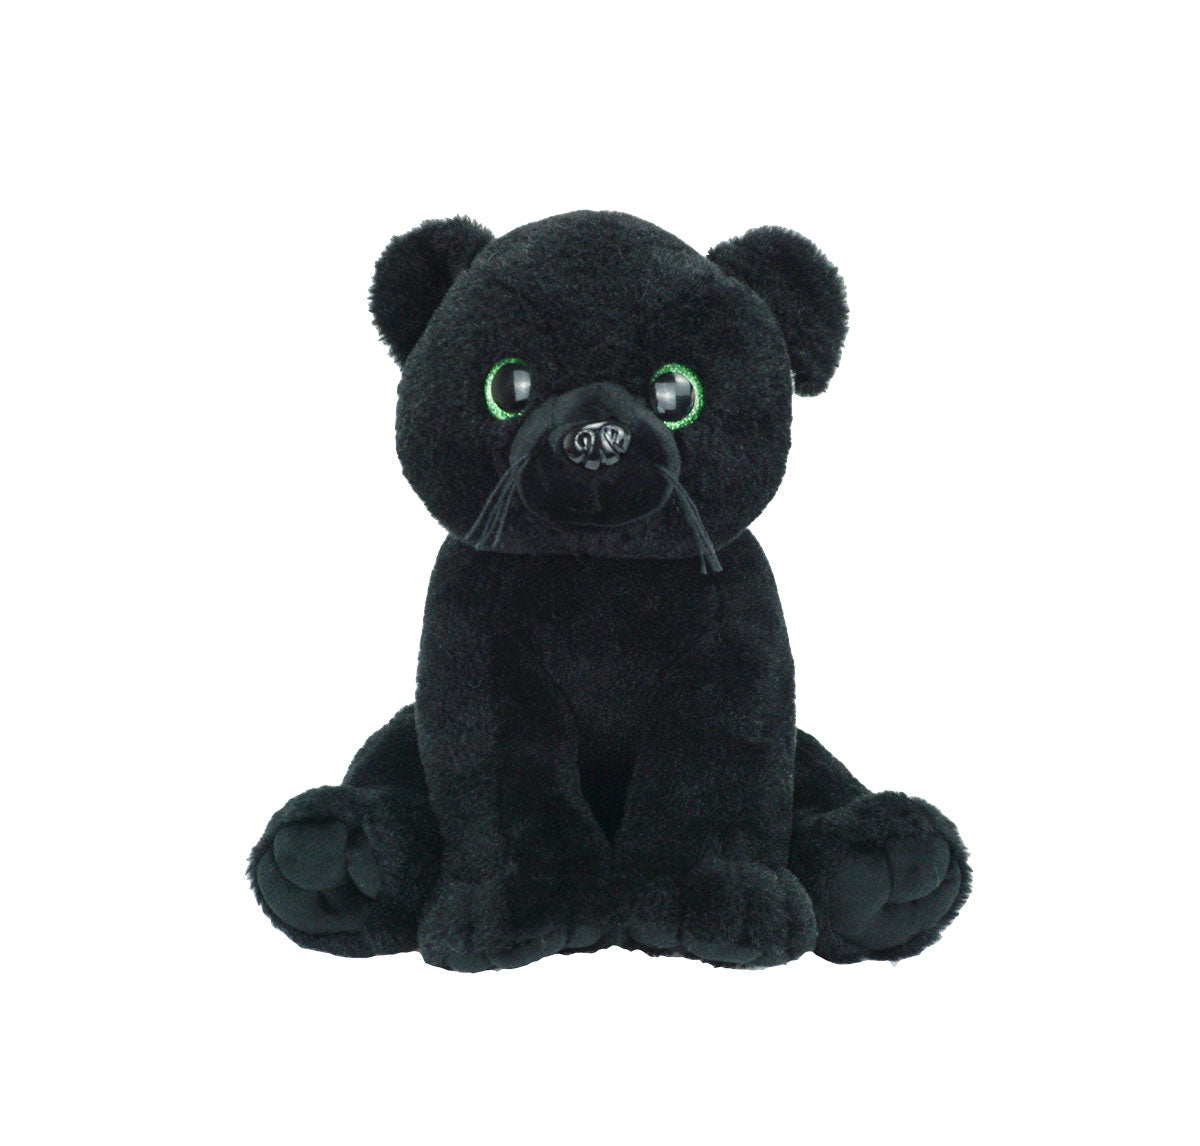 8" Onyx The Black Panther